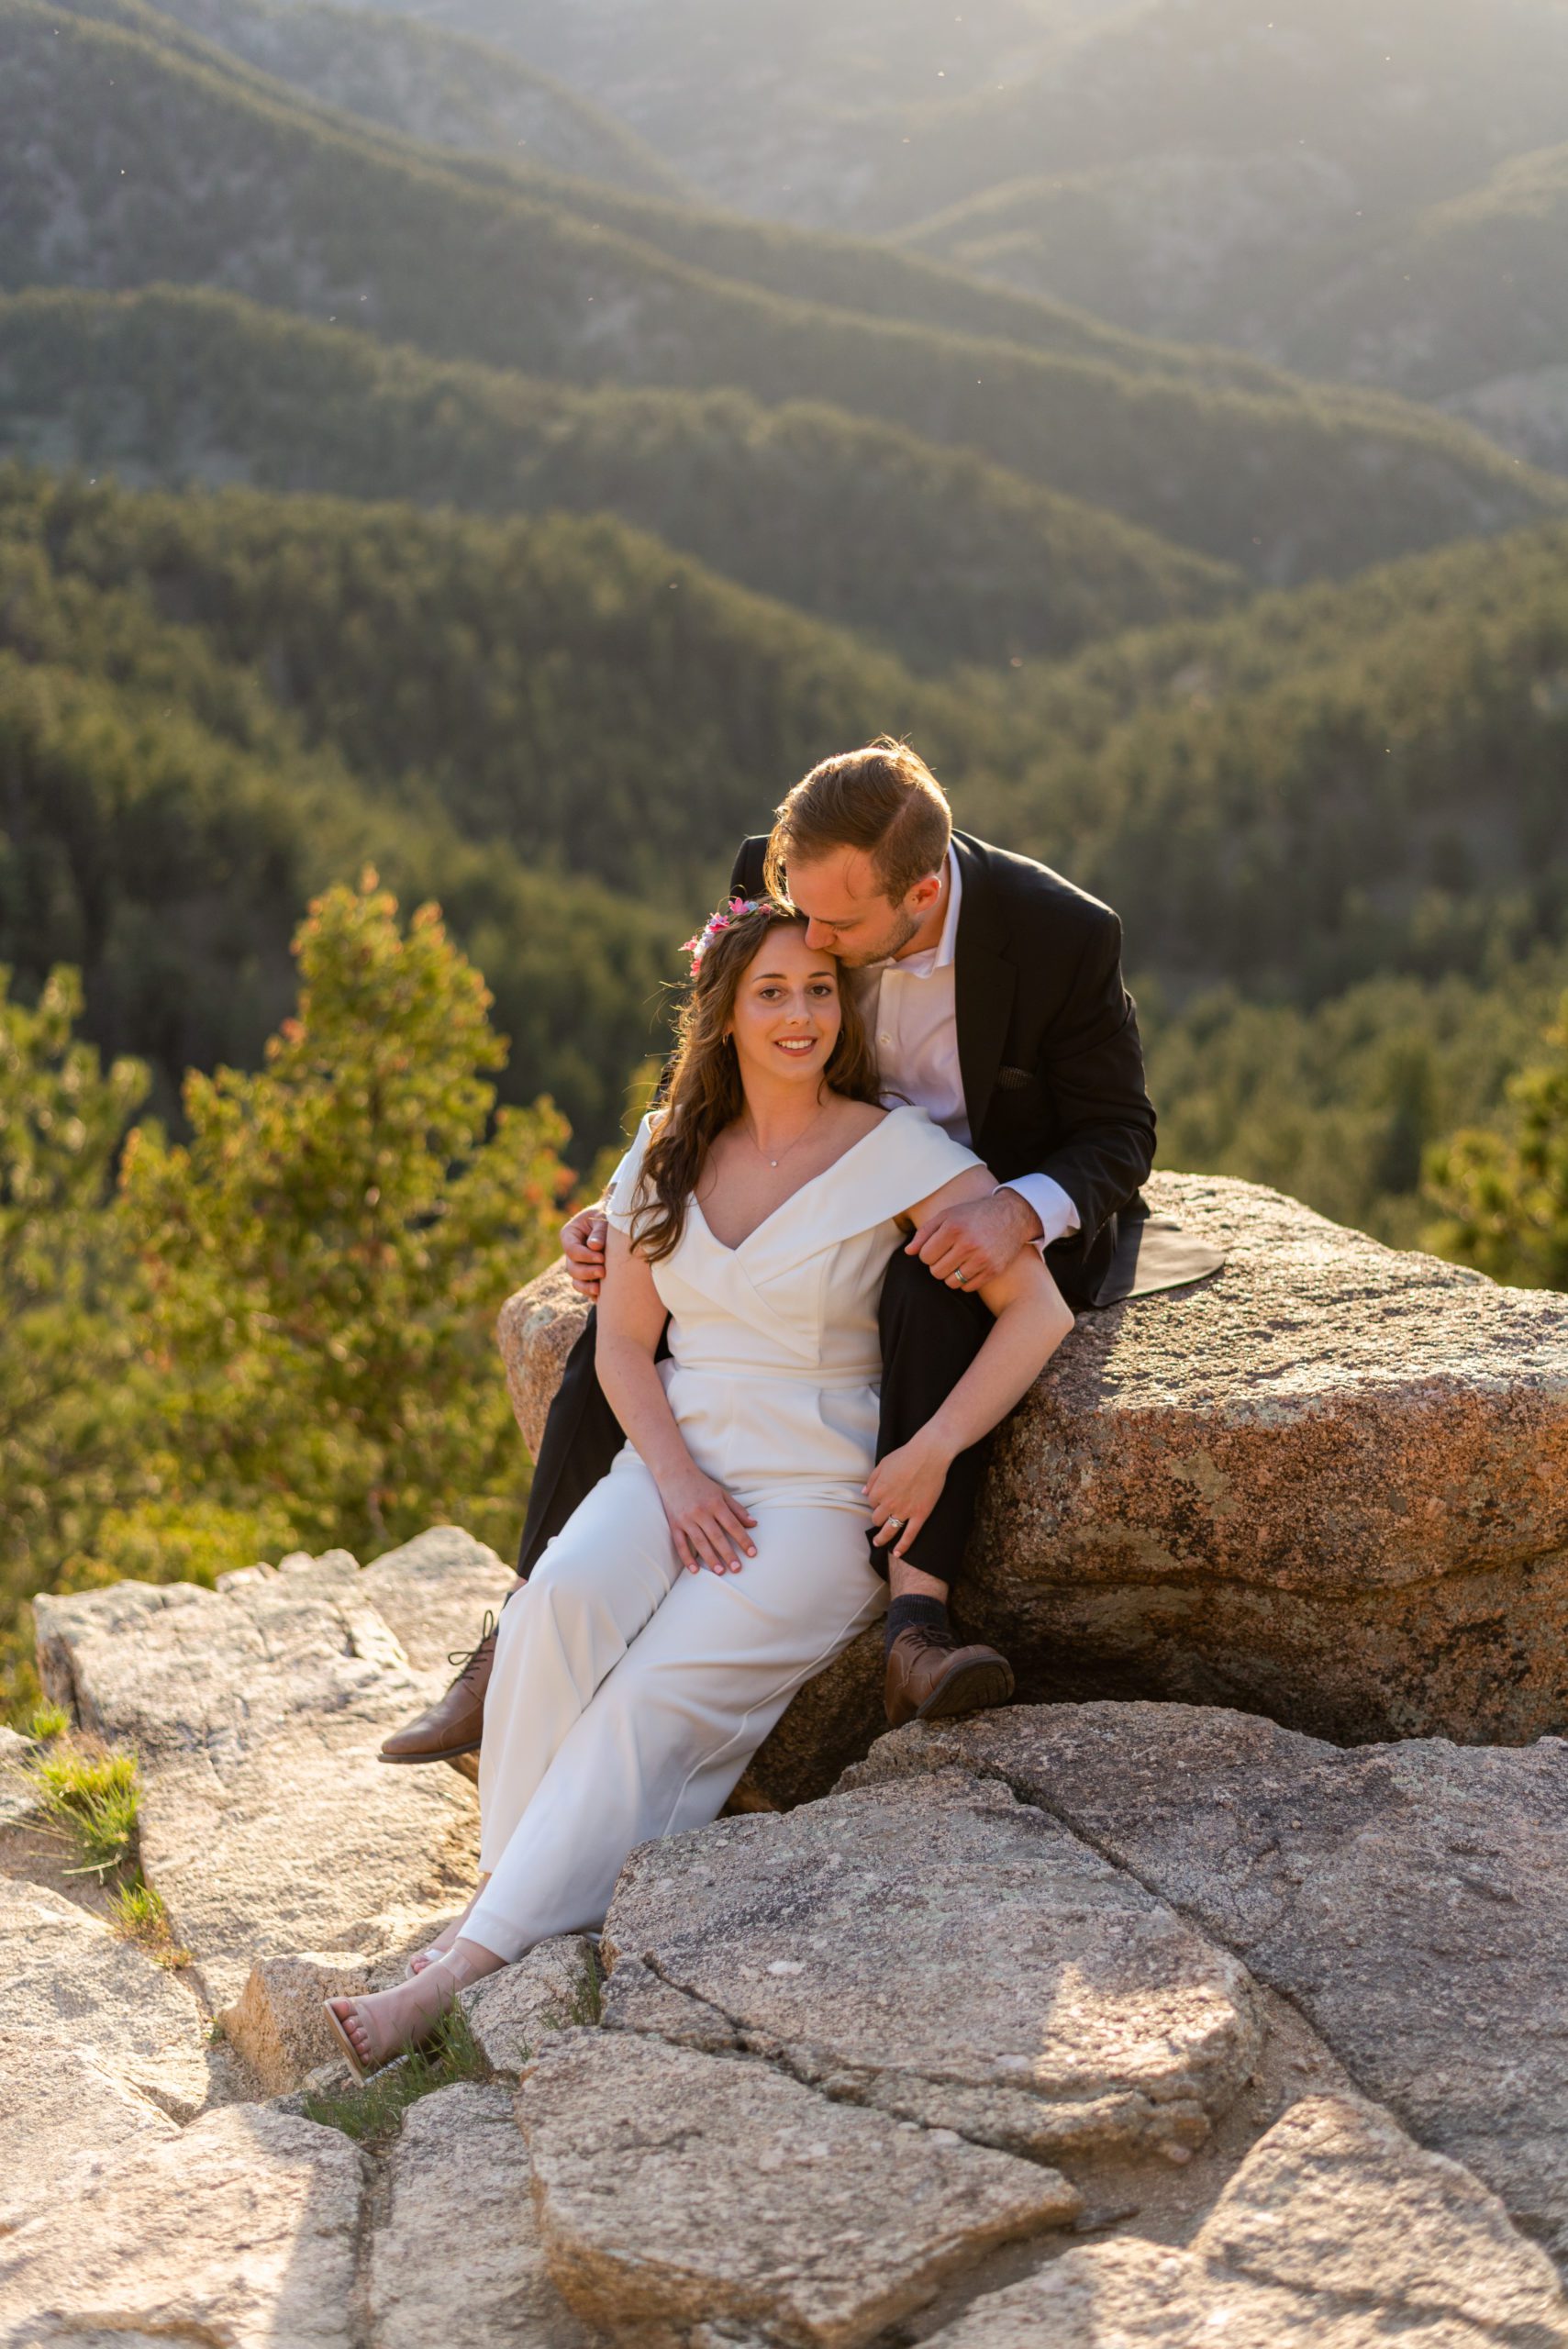 The groom kisses his bride on the forehead as she sits between his legs at the overlook during their Boulder hiking elopement near realization point.